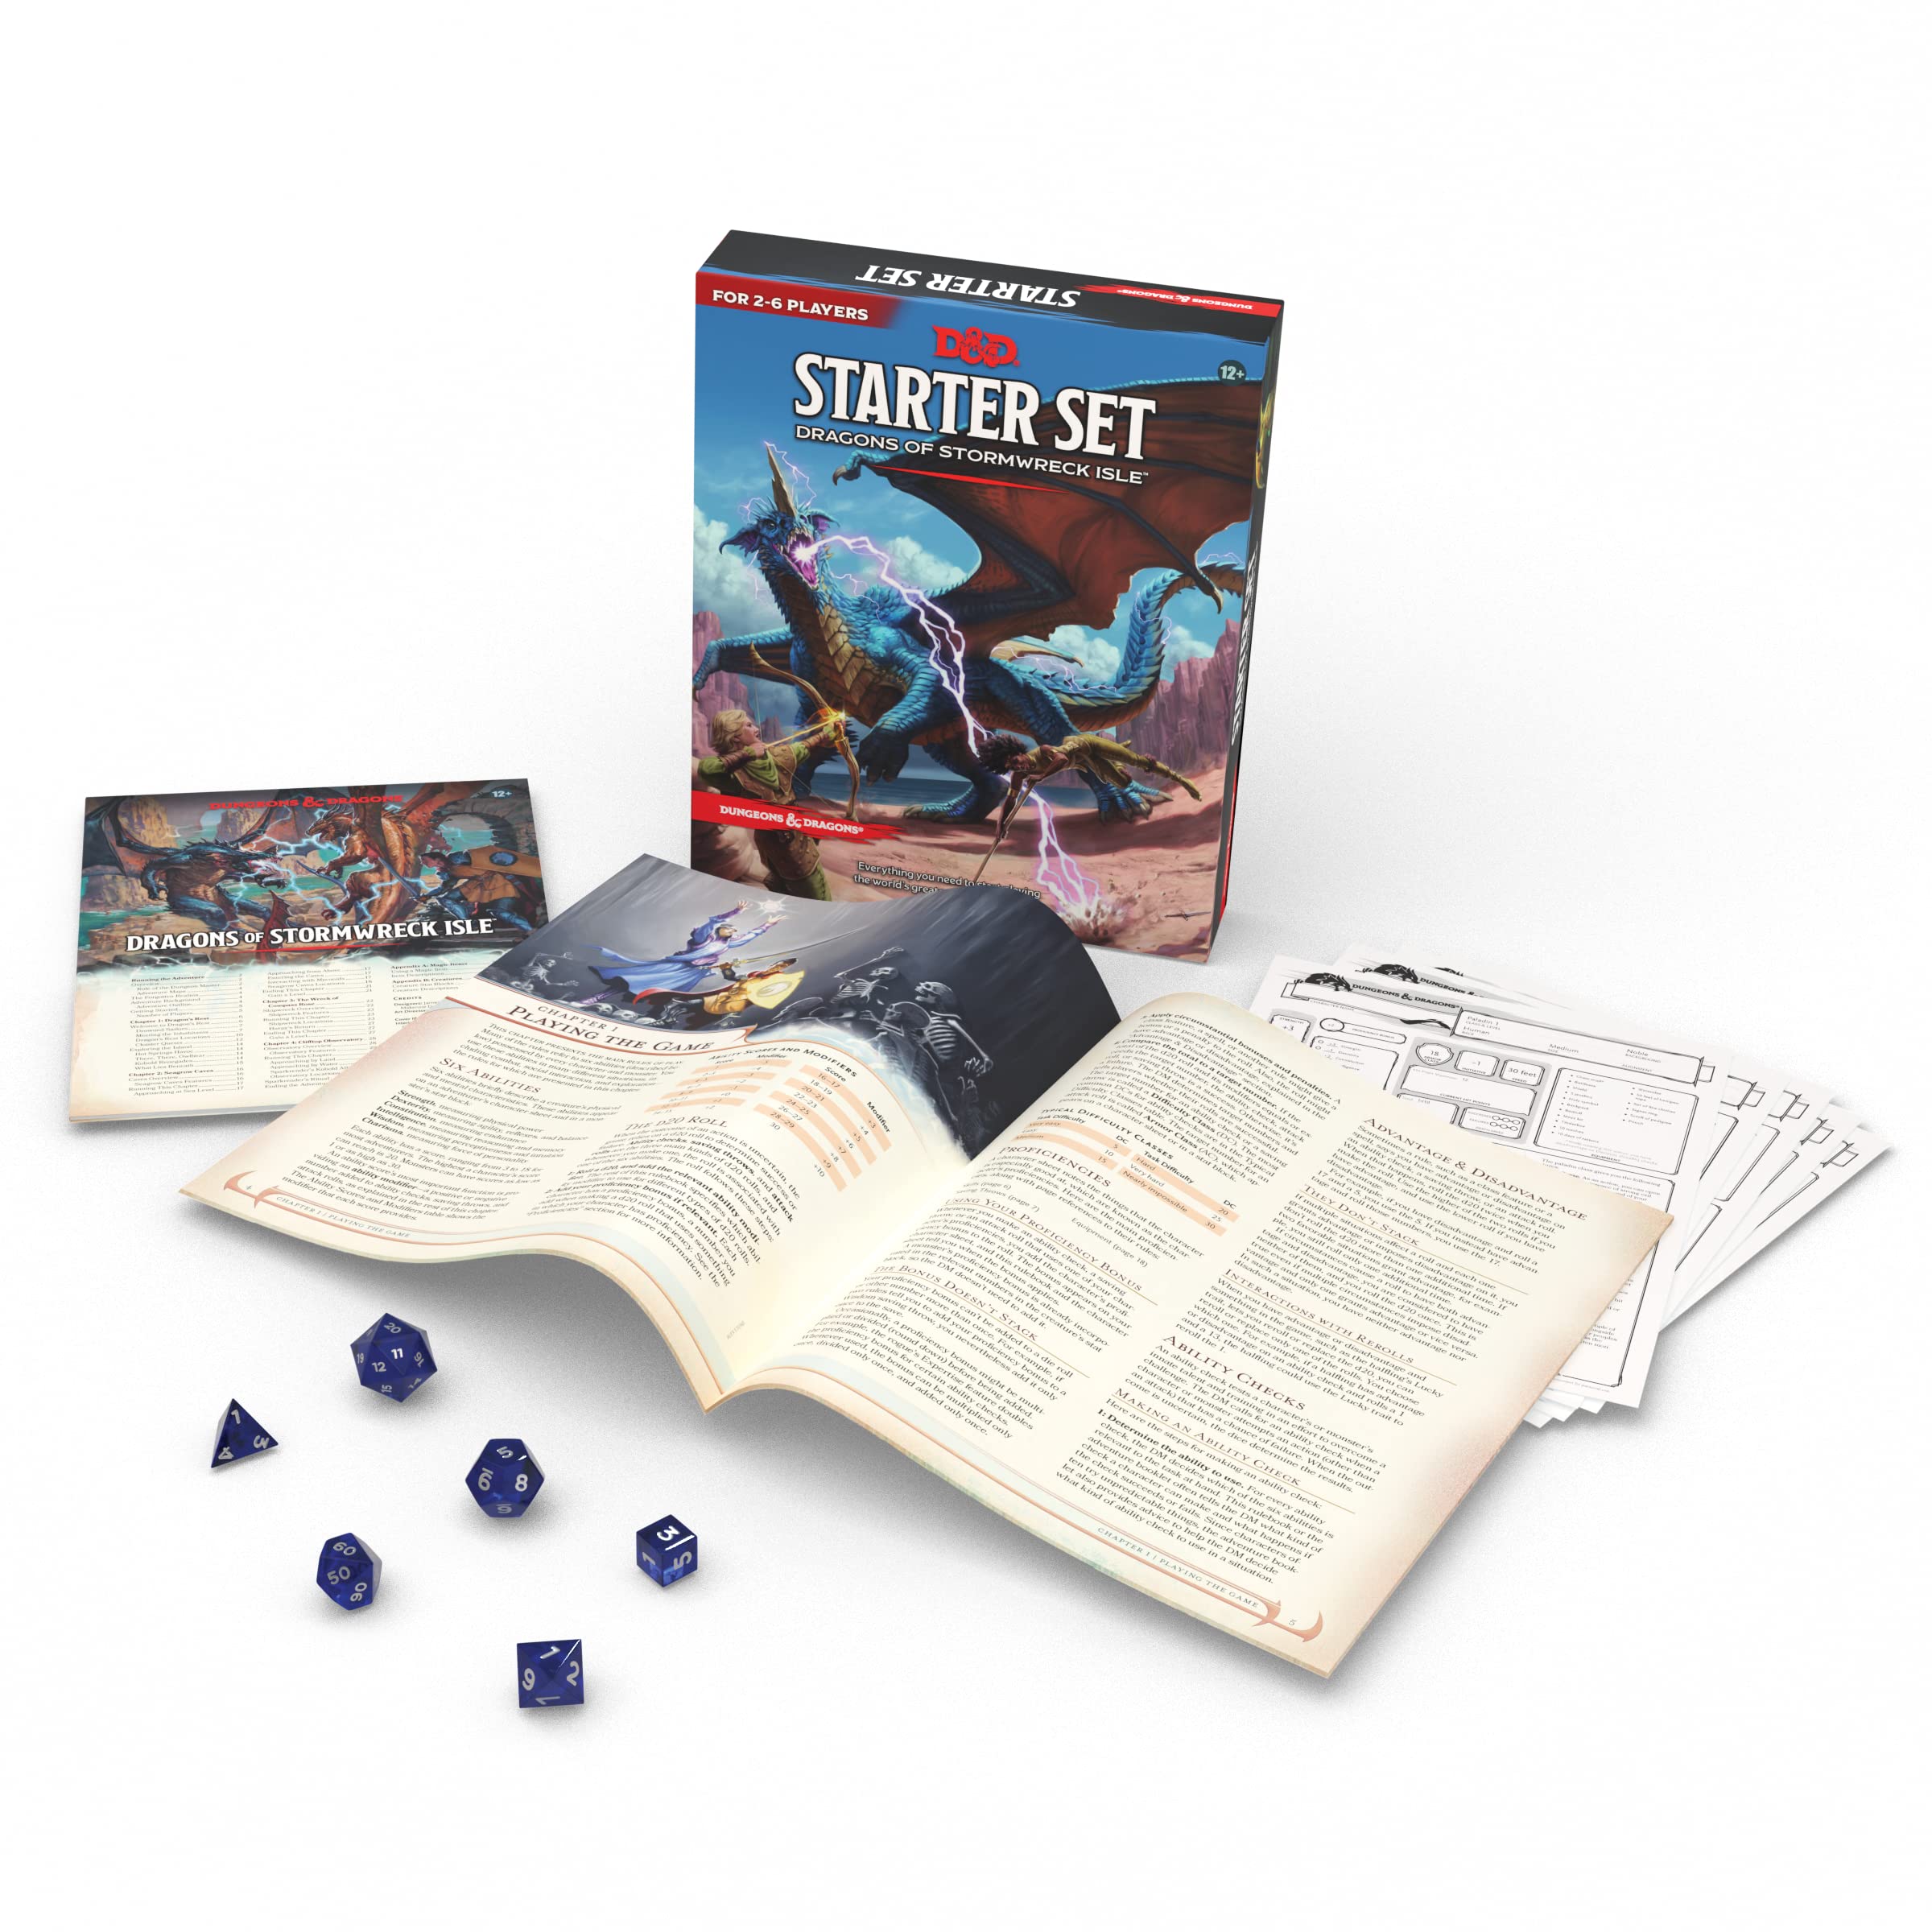 Dungeons & Dragons Dragons of Stormwreck Isle Starter Set Game $14 + Free Shipping w/ Prime or on $35+